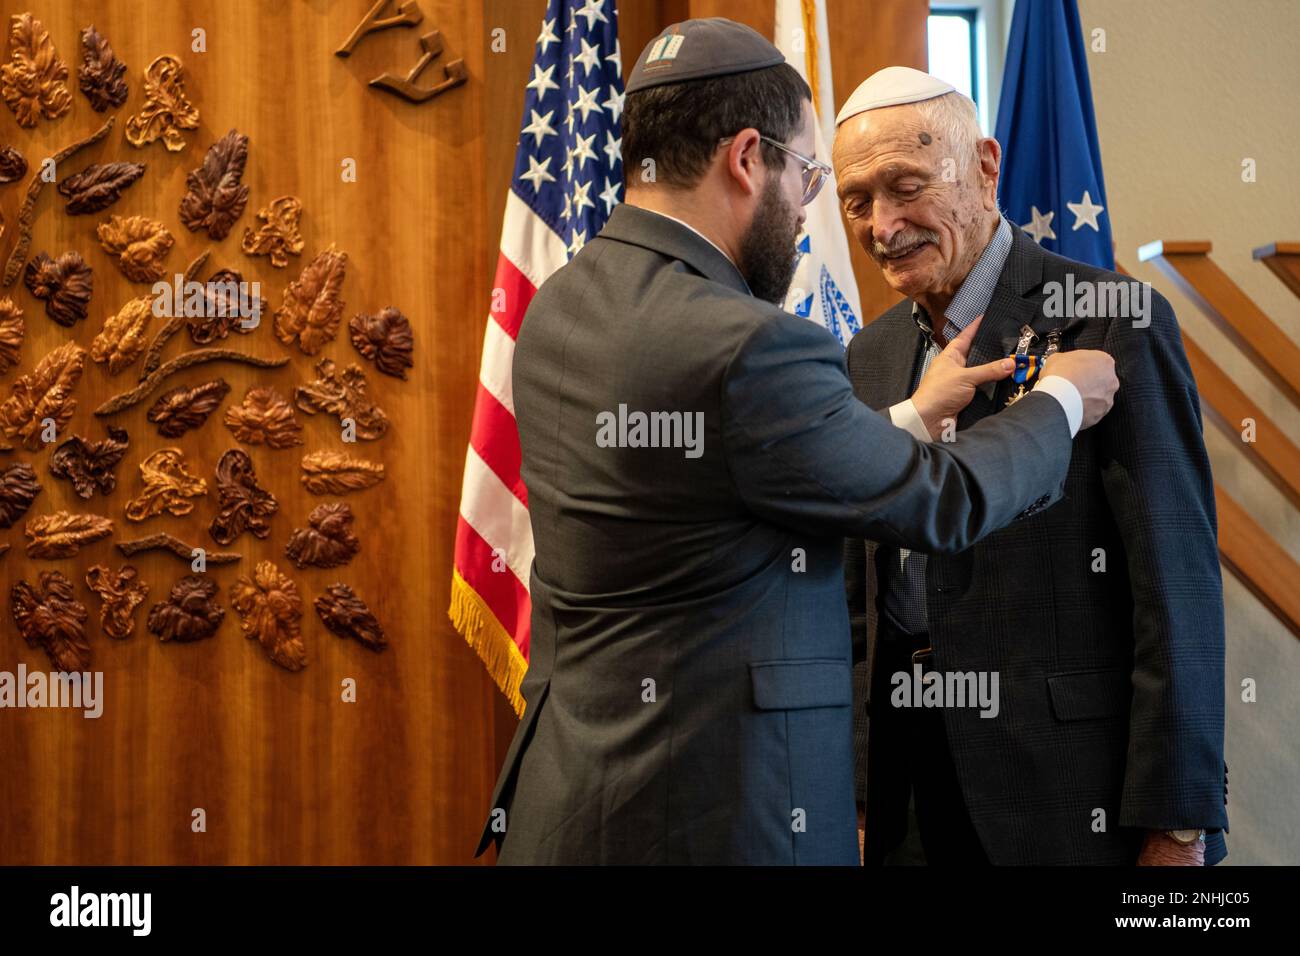 U.S. Army Air Corps 1st Lt. Gerald Teldon (right), retired, receives his award from his grandson, Rabbi Mendel Teldon, for his honorable service as a pilot on July 29, 2022, at the Chabad Center for Jewish Life and Learning, San Antonio, Texas. Teldon, born in Bronx, N.Y., in 1924, joined the military in 1944. He completed 62 missions during WWII and the Korean War. Lt. Col. Andrew Stein, 502nd Operations Support Squadron commander, was the presiding officers. The awards presented to Teldon are as follows: the Air Medal; American Campaign Medal; European – African – Middle Eastern Campaign Med Stock Photo